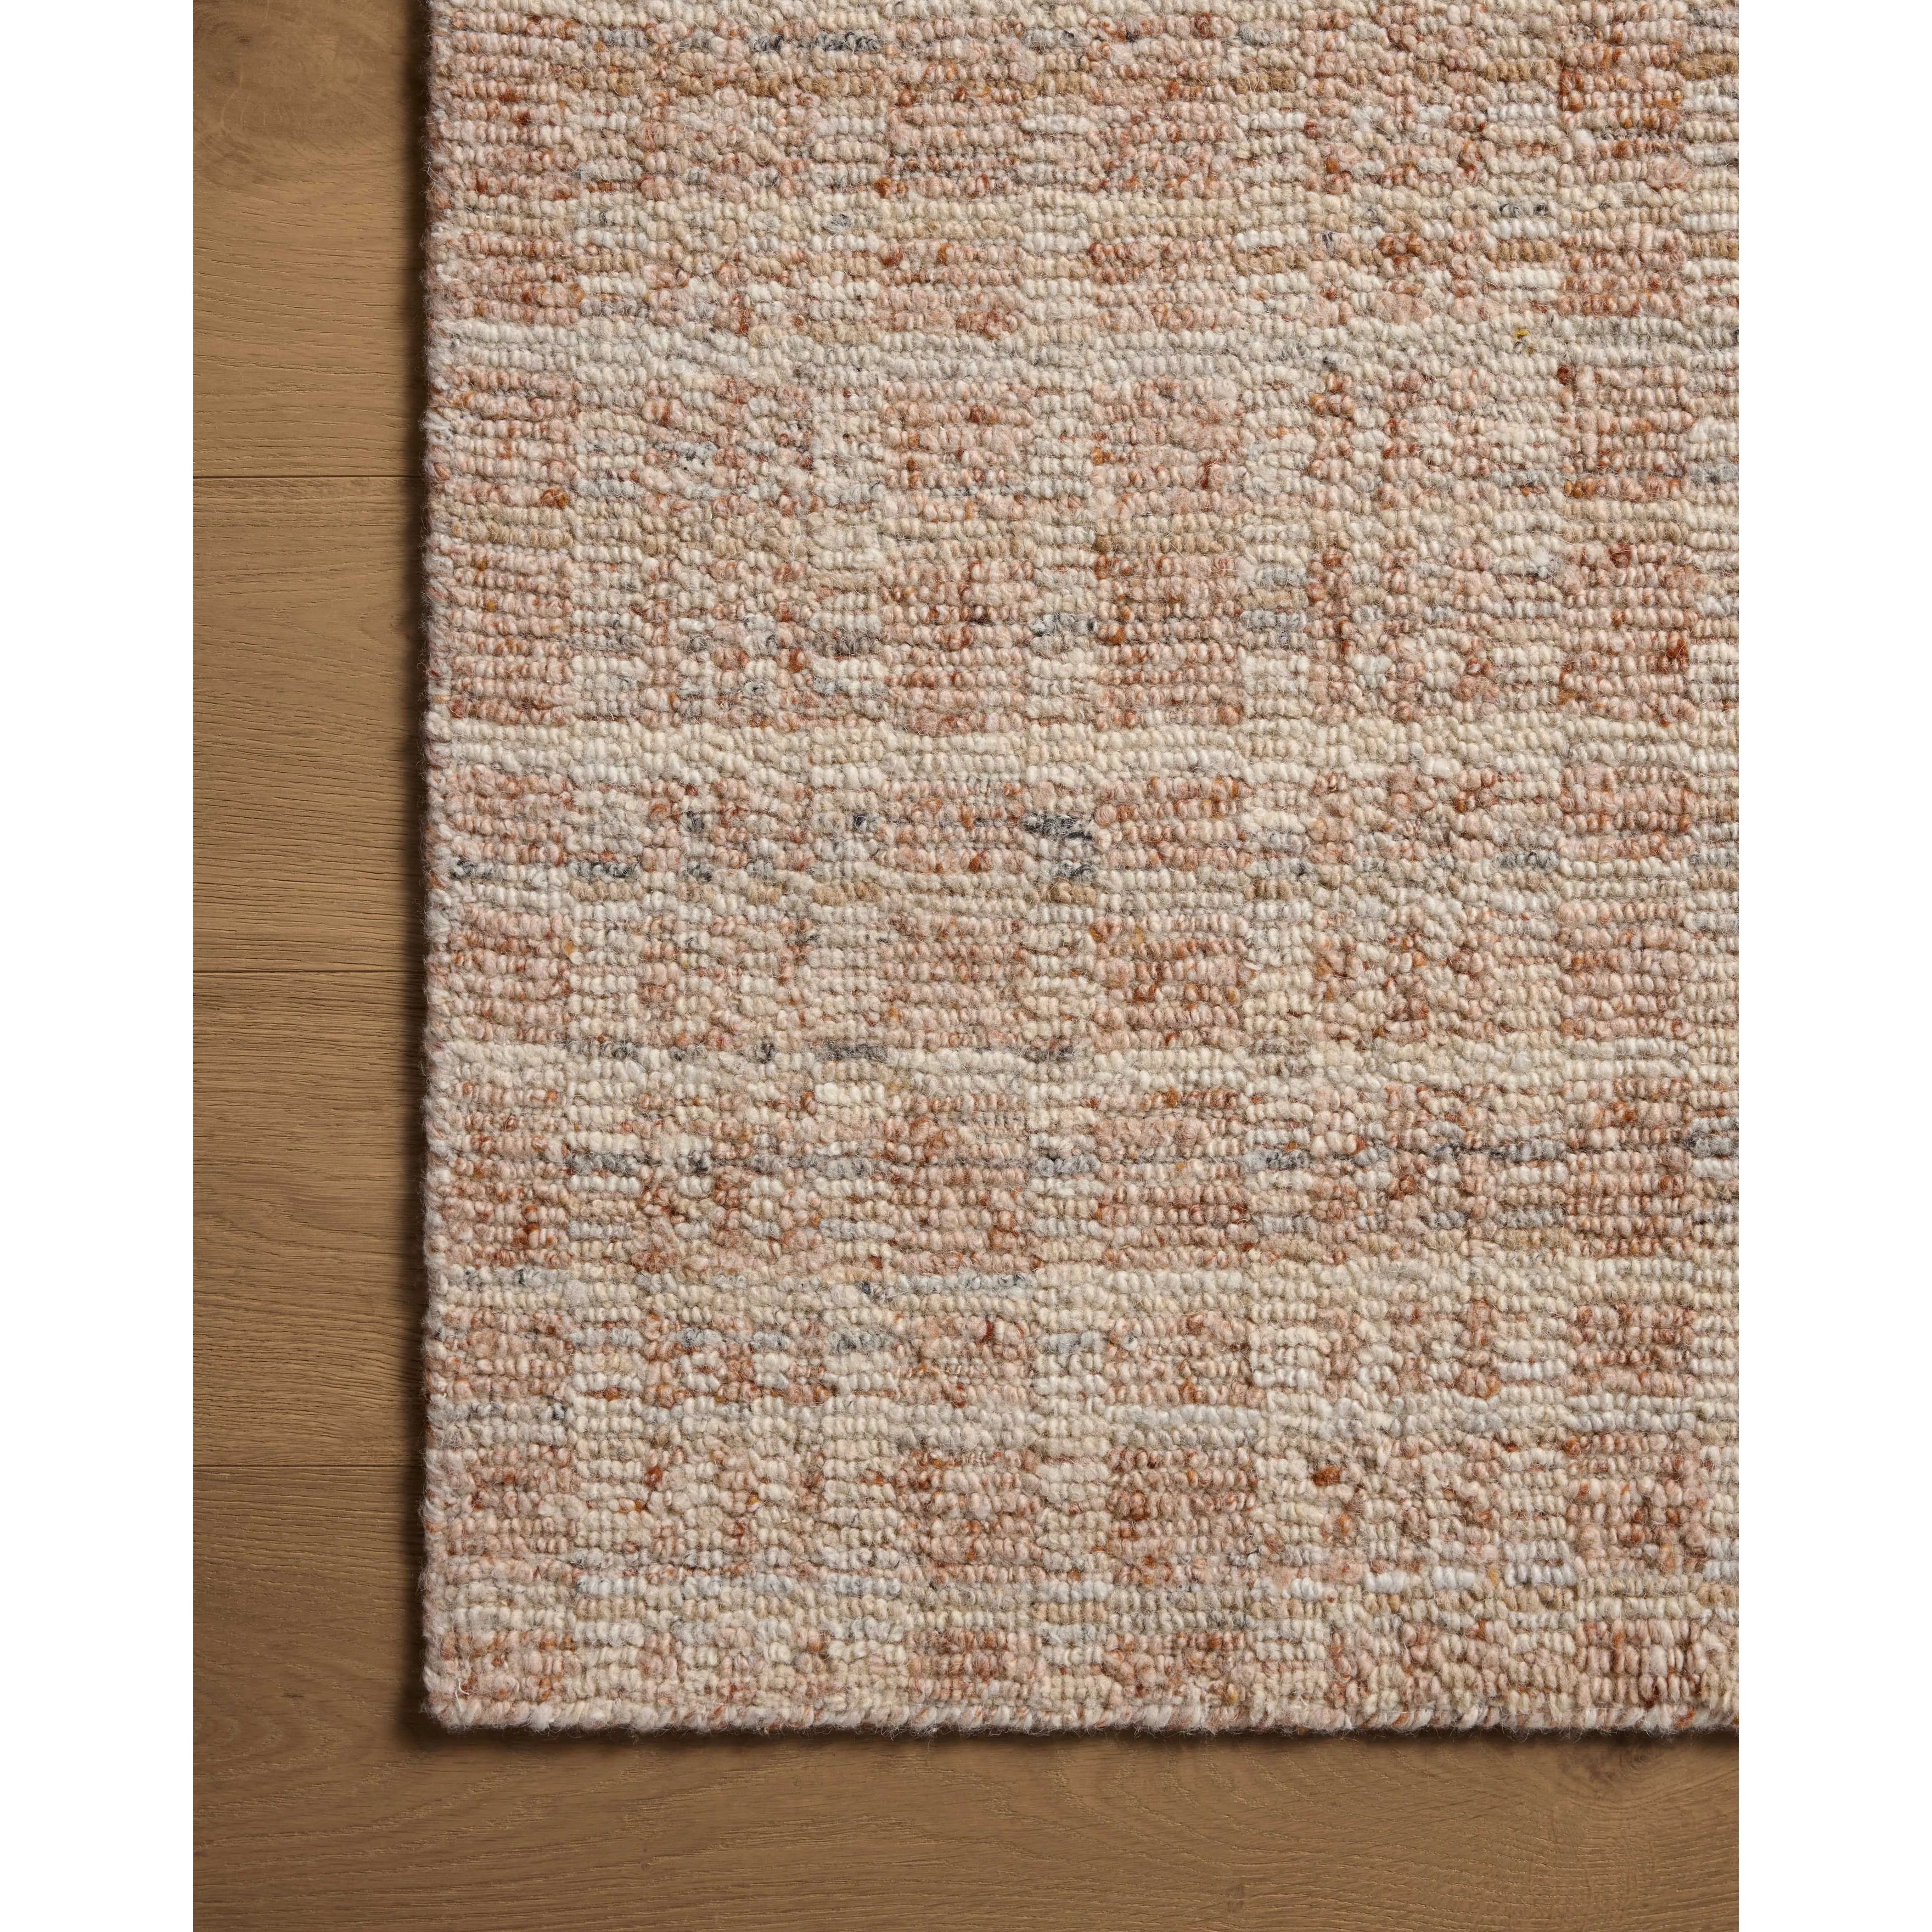 The Sonya Terracotta / Natural Rug is a hand-loomed area rug with a light, airy palette and understated graphic design. The rug’s textural pile is a soft blend of wool and nylon that creates dimension in living rooms, bedrooms, and more. Amethyst Home provides interior design, new home construction design consulting, vintage area rugs, and lighting in the San Diego metro area.